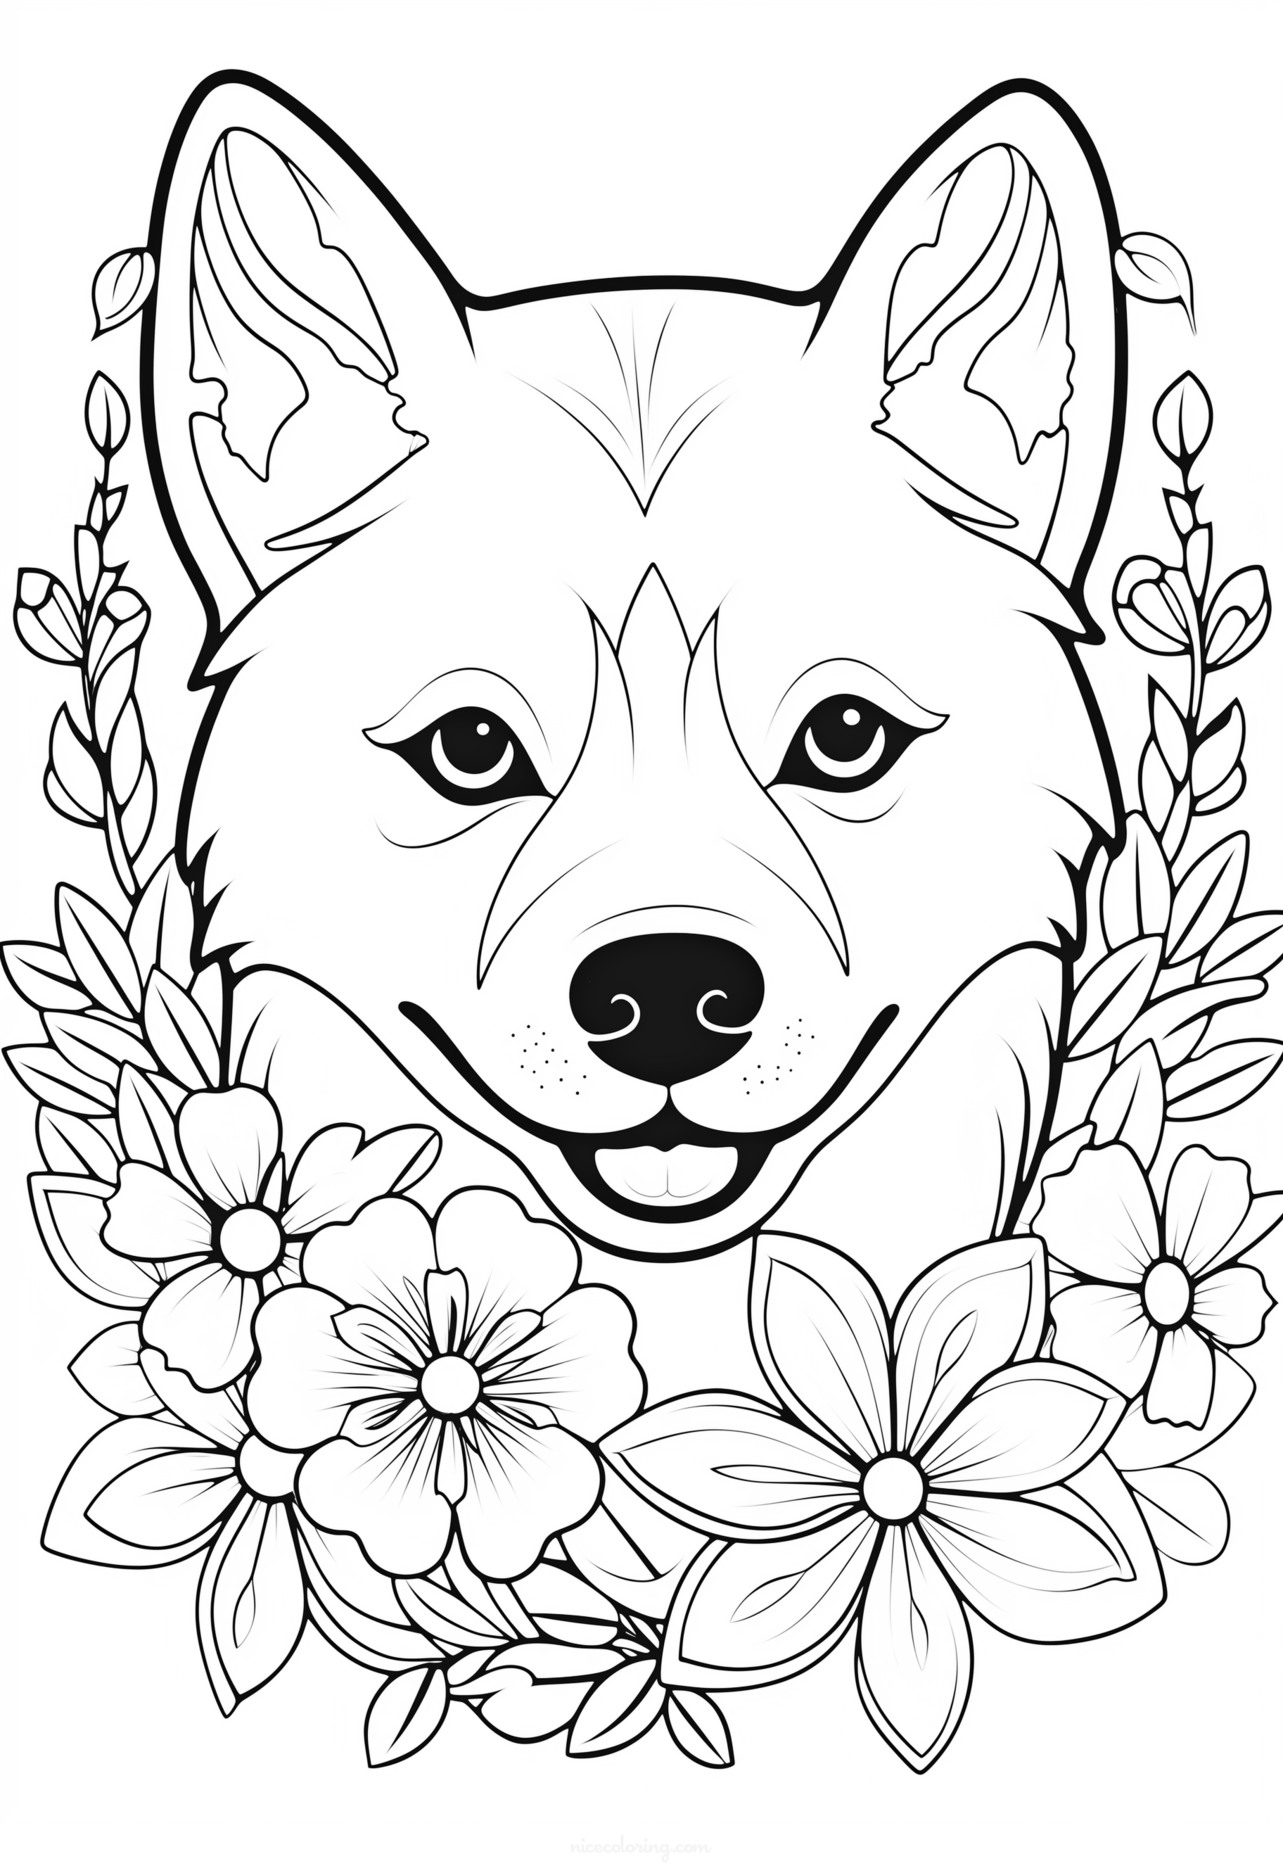 Cute dog sitting with a bone coloring page